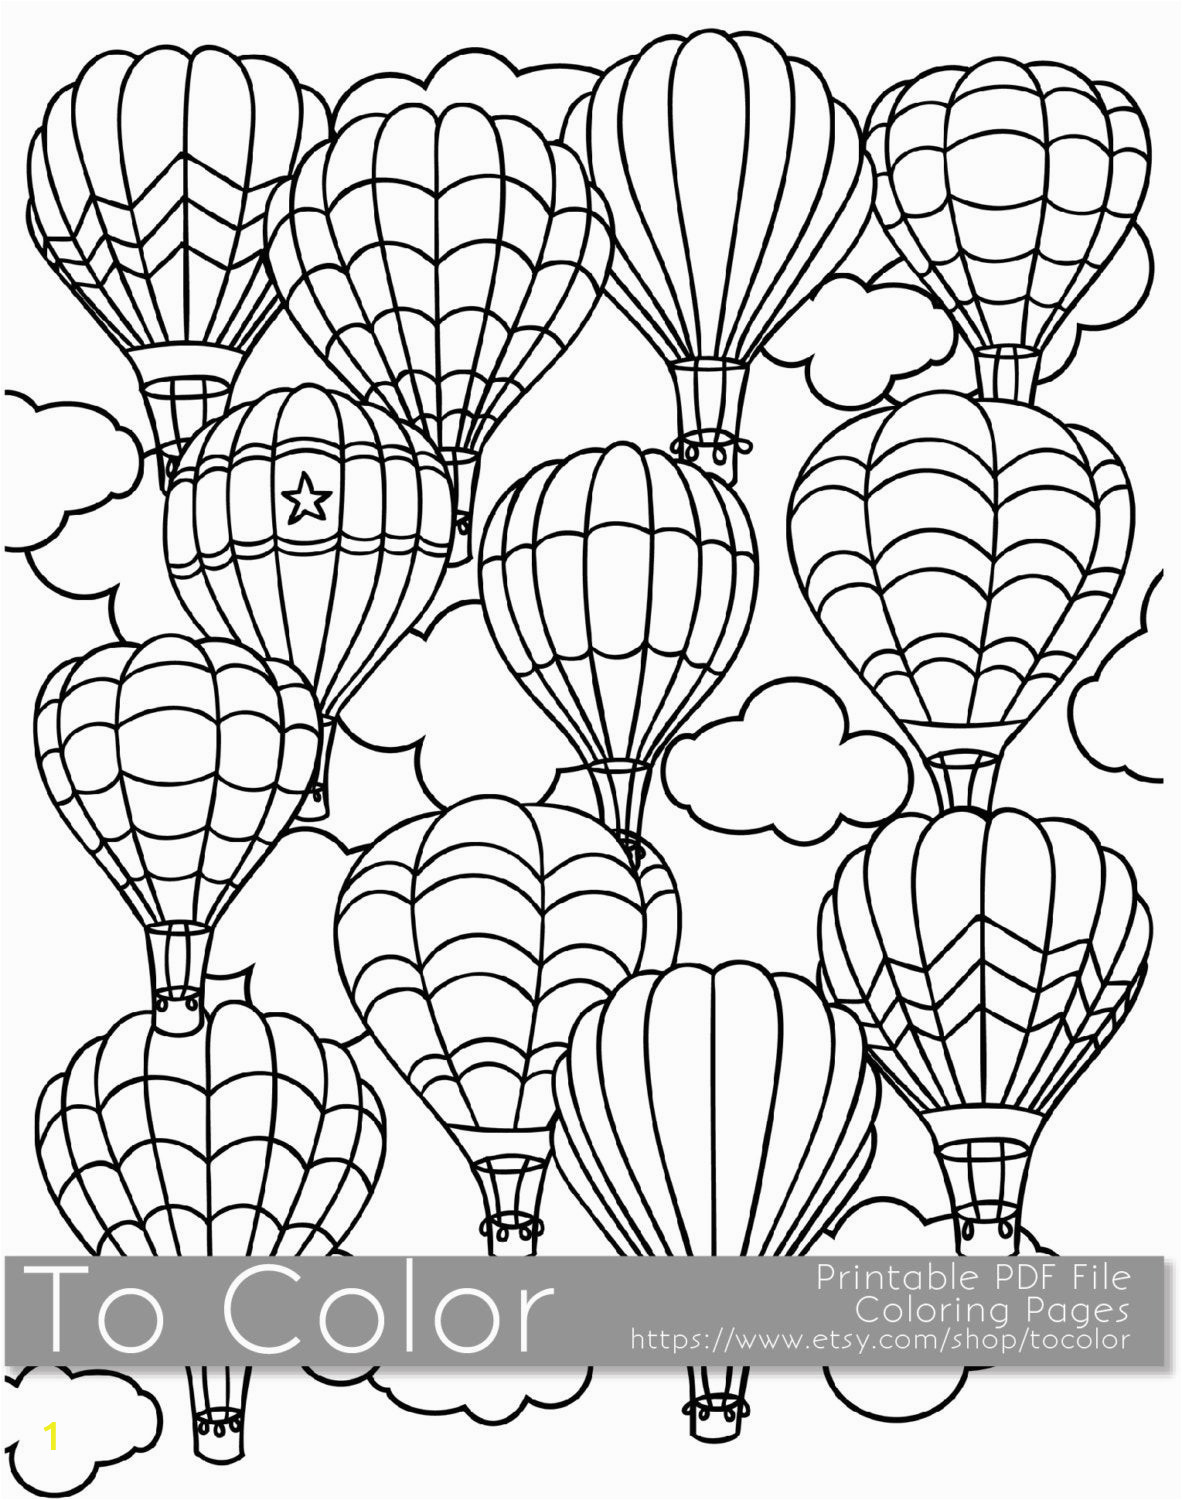 Hot Air Balloon Coloring Page for Adults Printable Hot Air Balloon Coloring Page for Adults Pdf Jpg